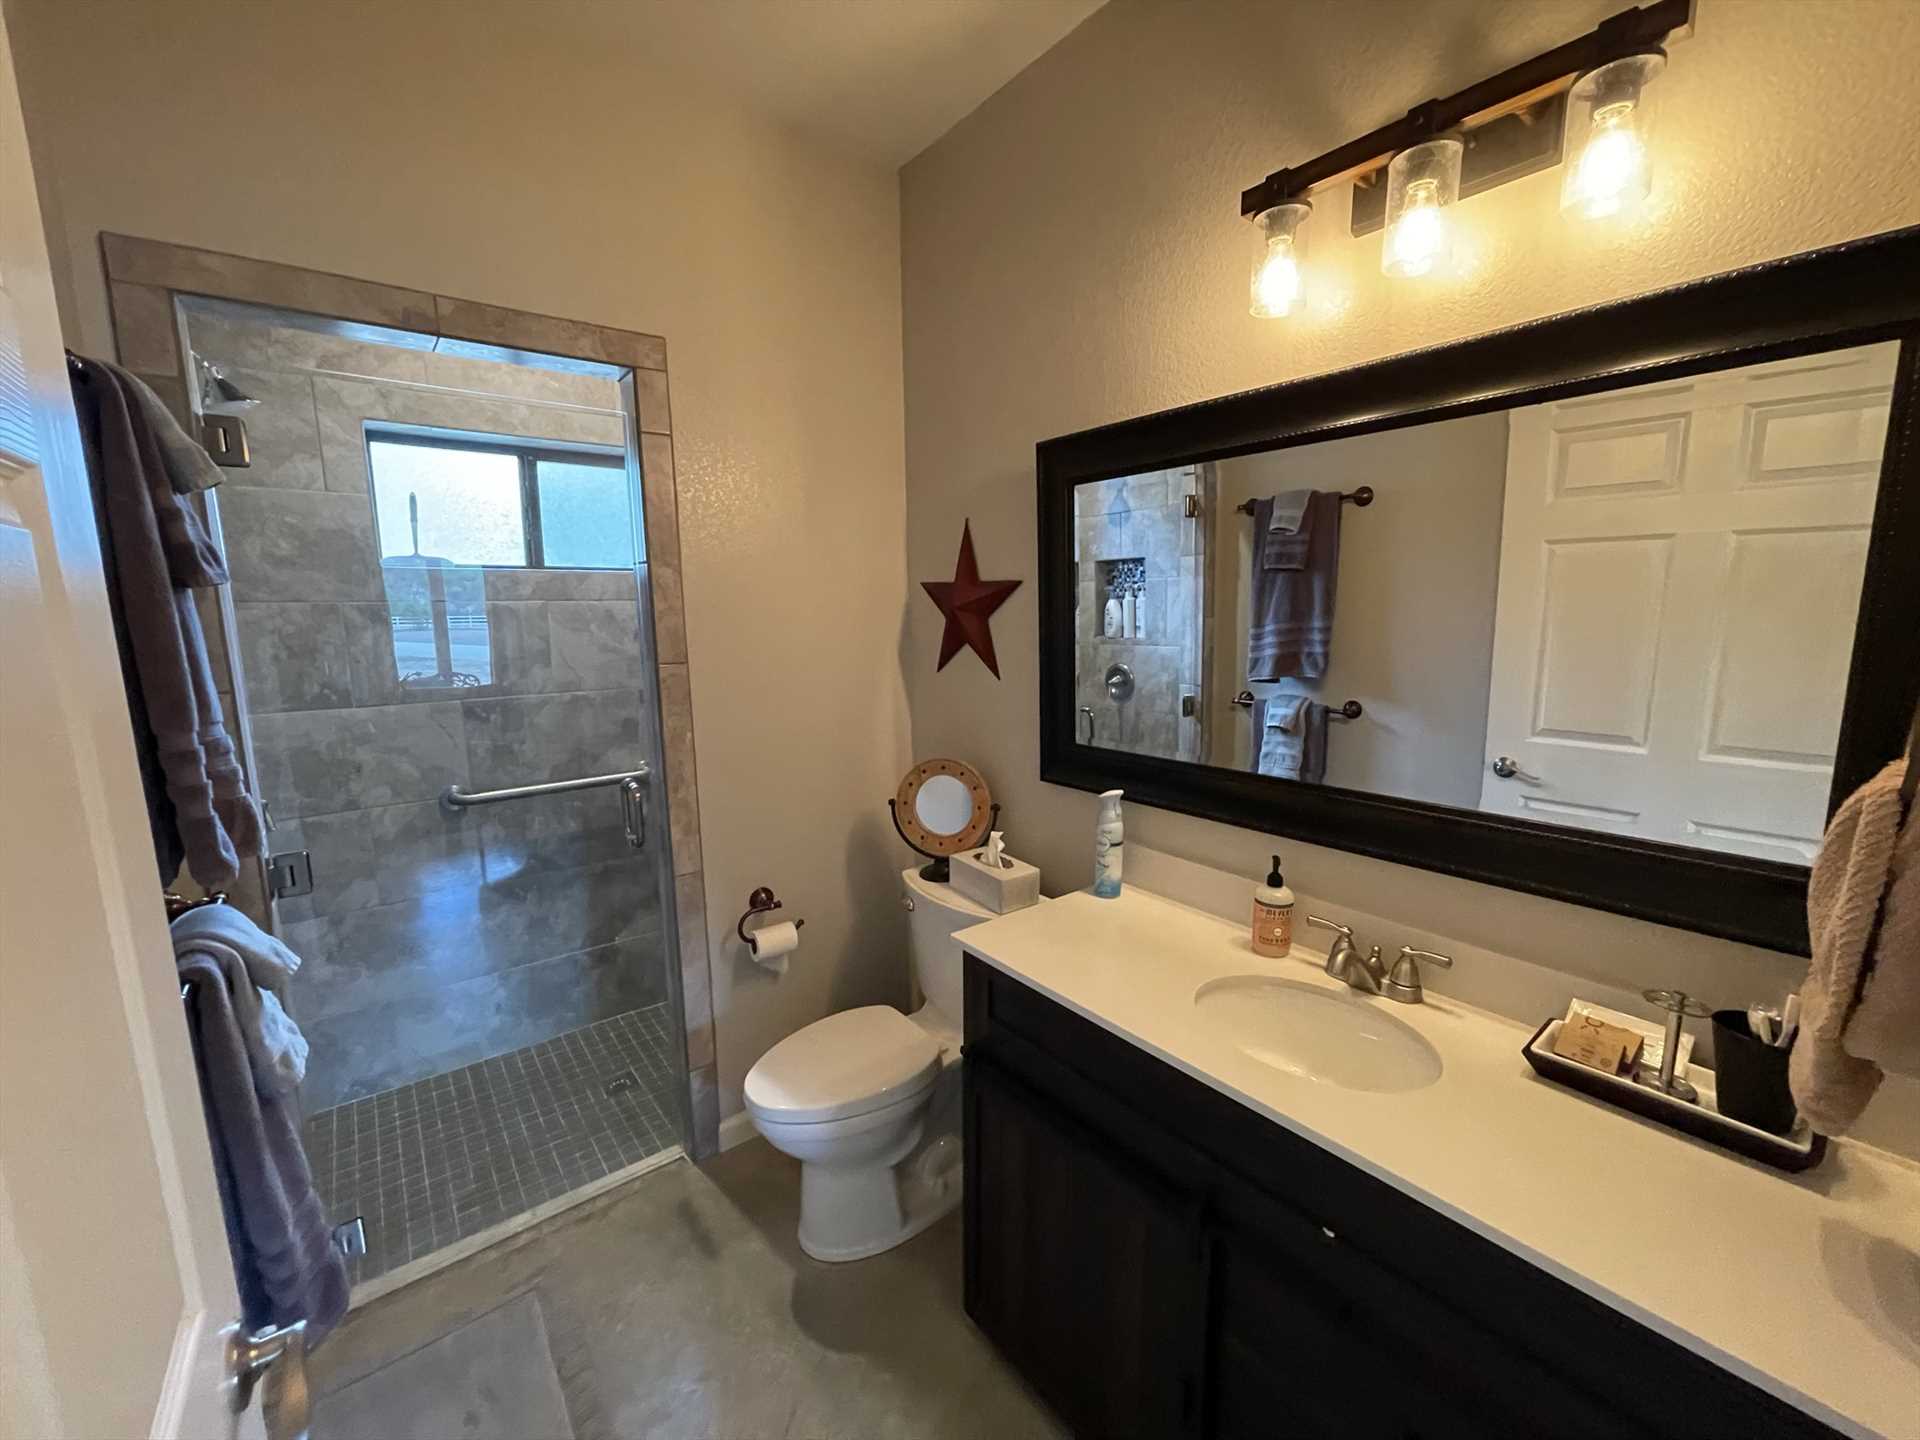                                                 The full bath includes a roomy shower stall, roomy vanity, and plenty of clean linens.